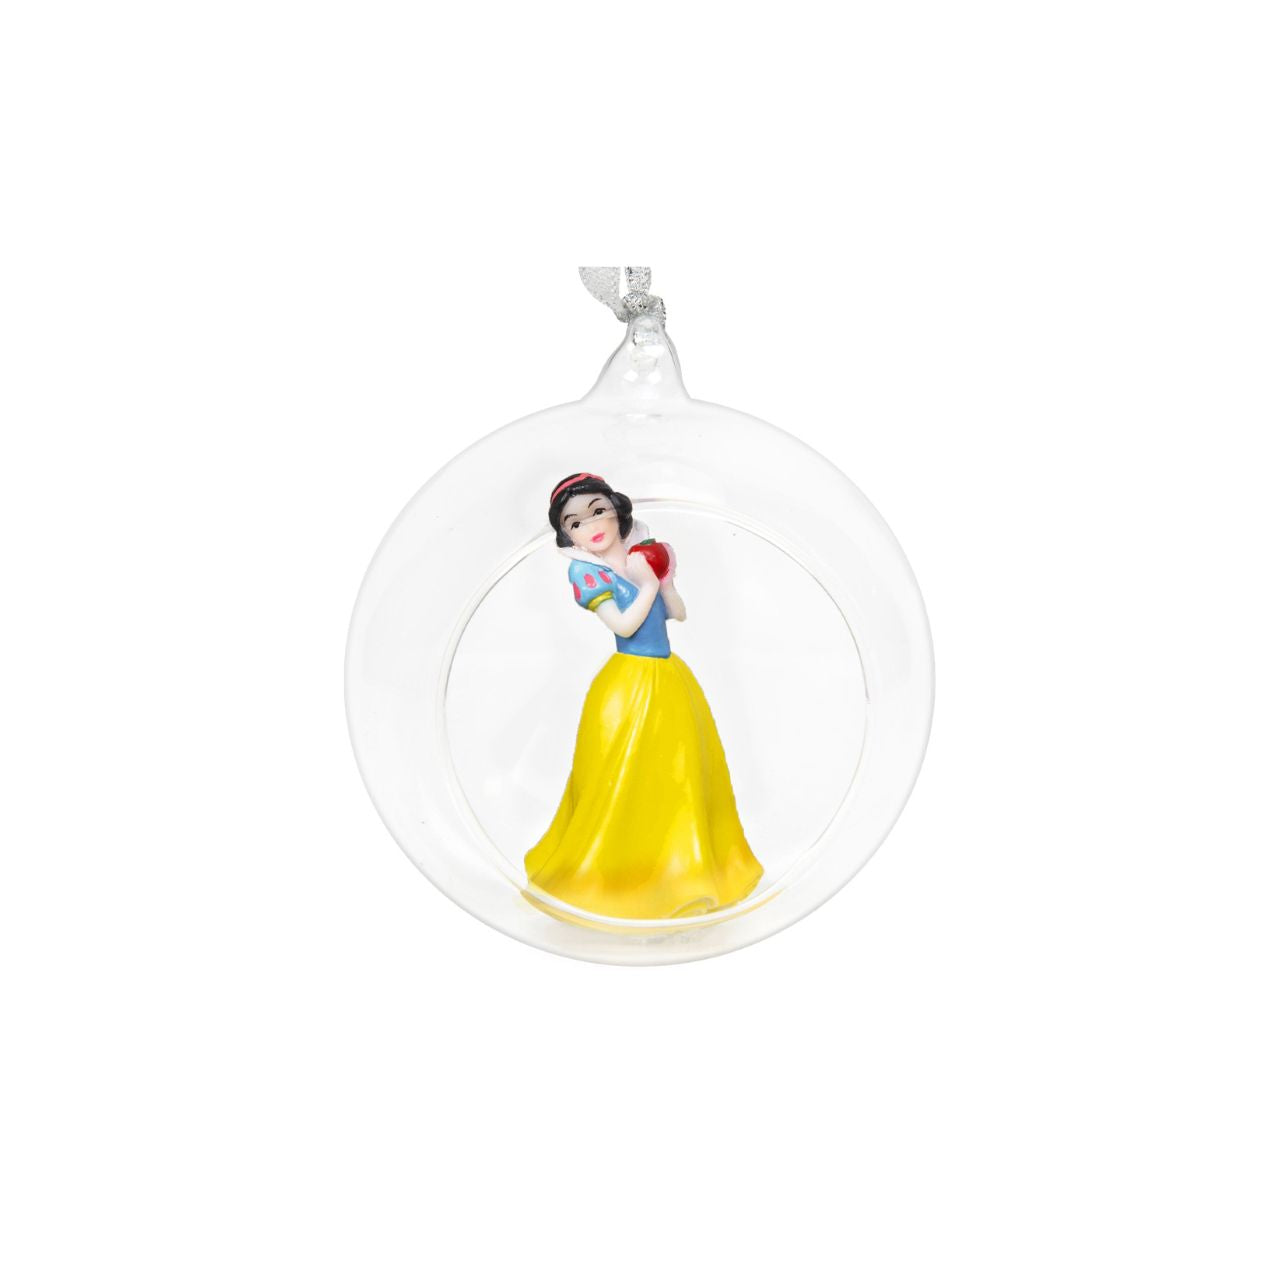 Disney Princess Snow White 3D Bauble  Bring some Disney magic to your Christmas tree with this collectable Snow White hanging decoration.